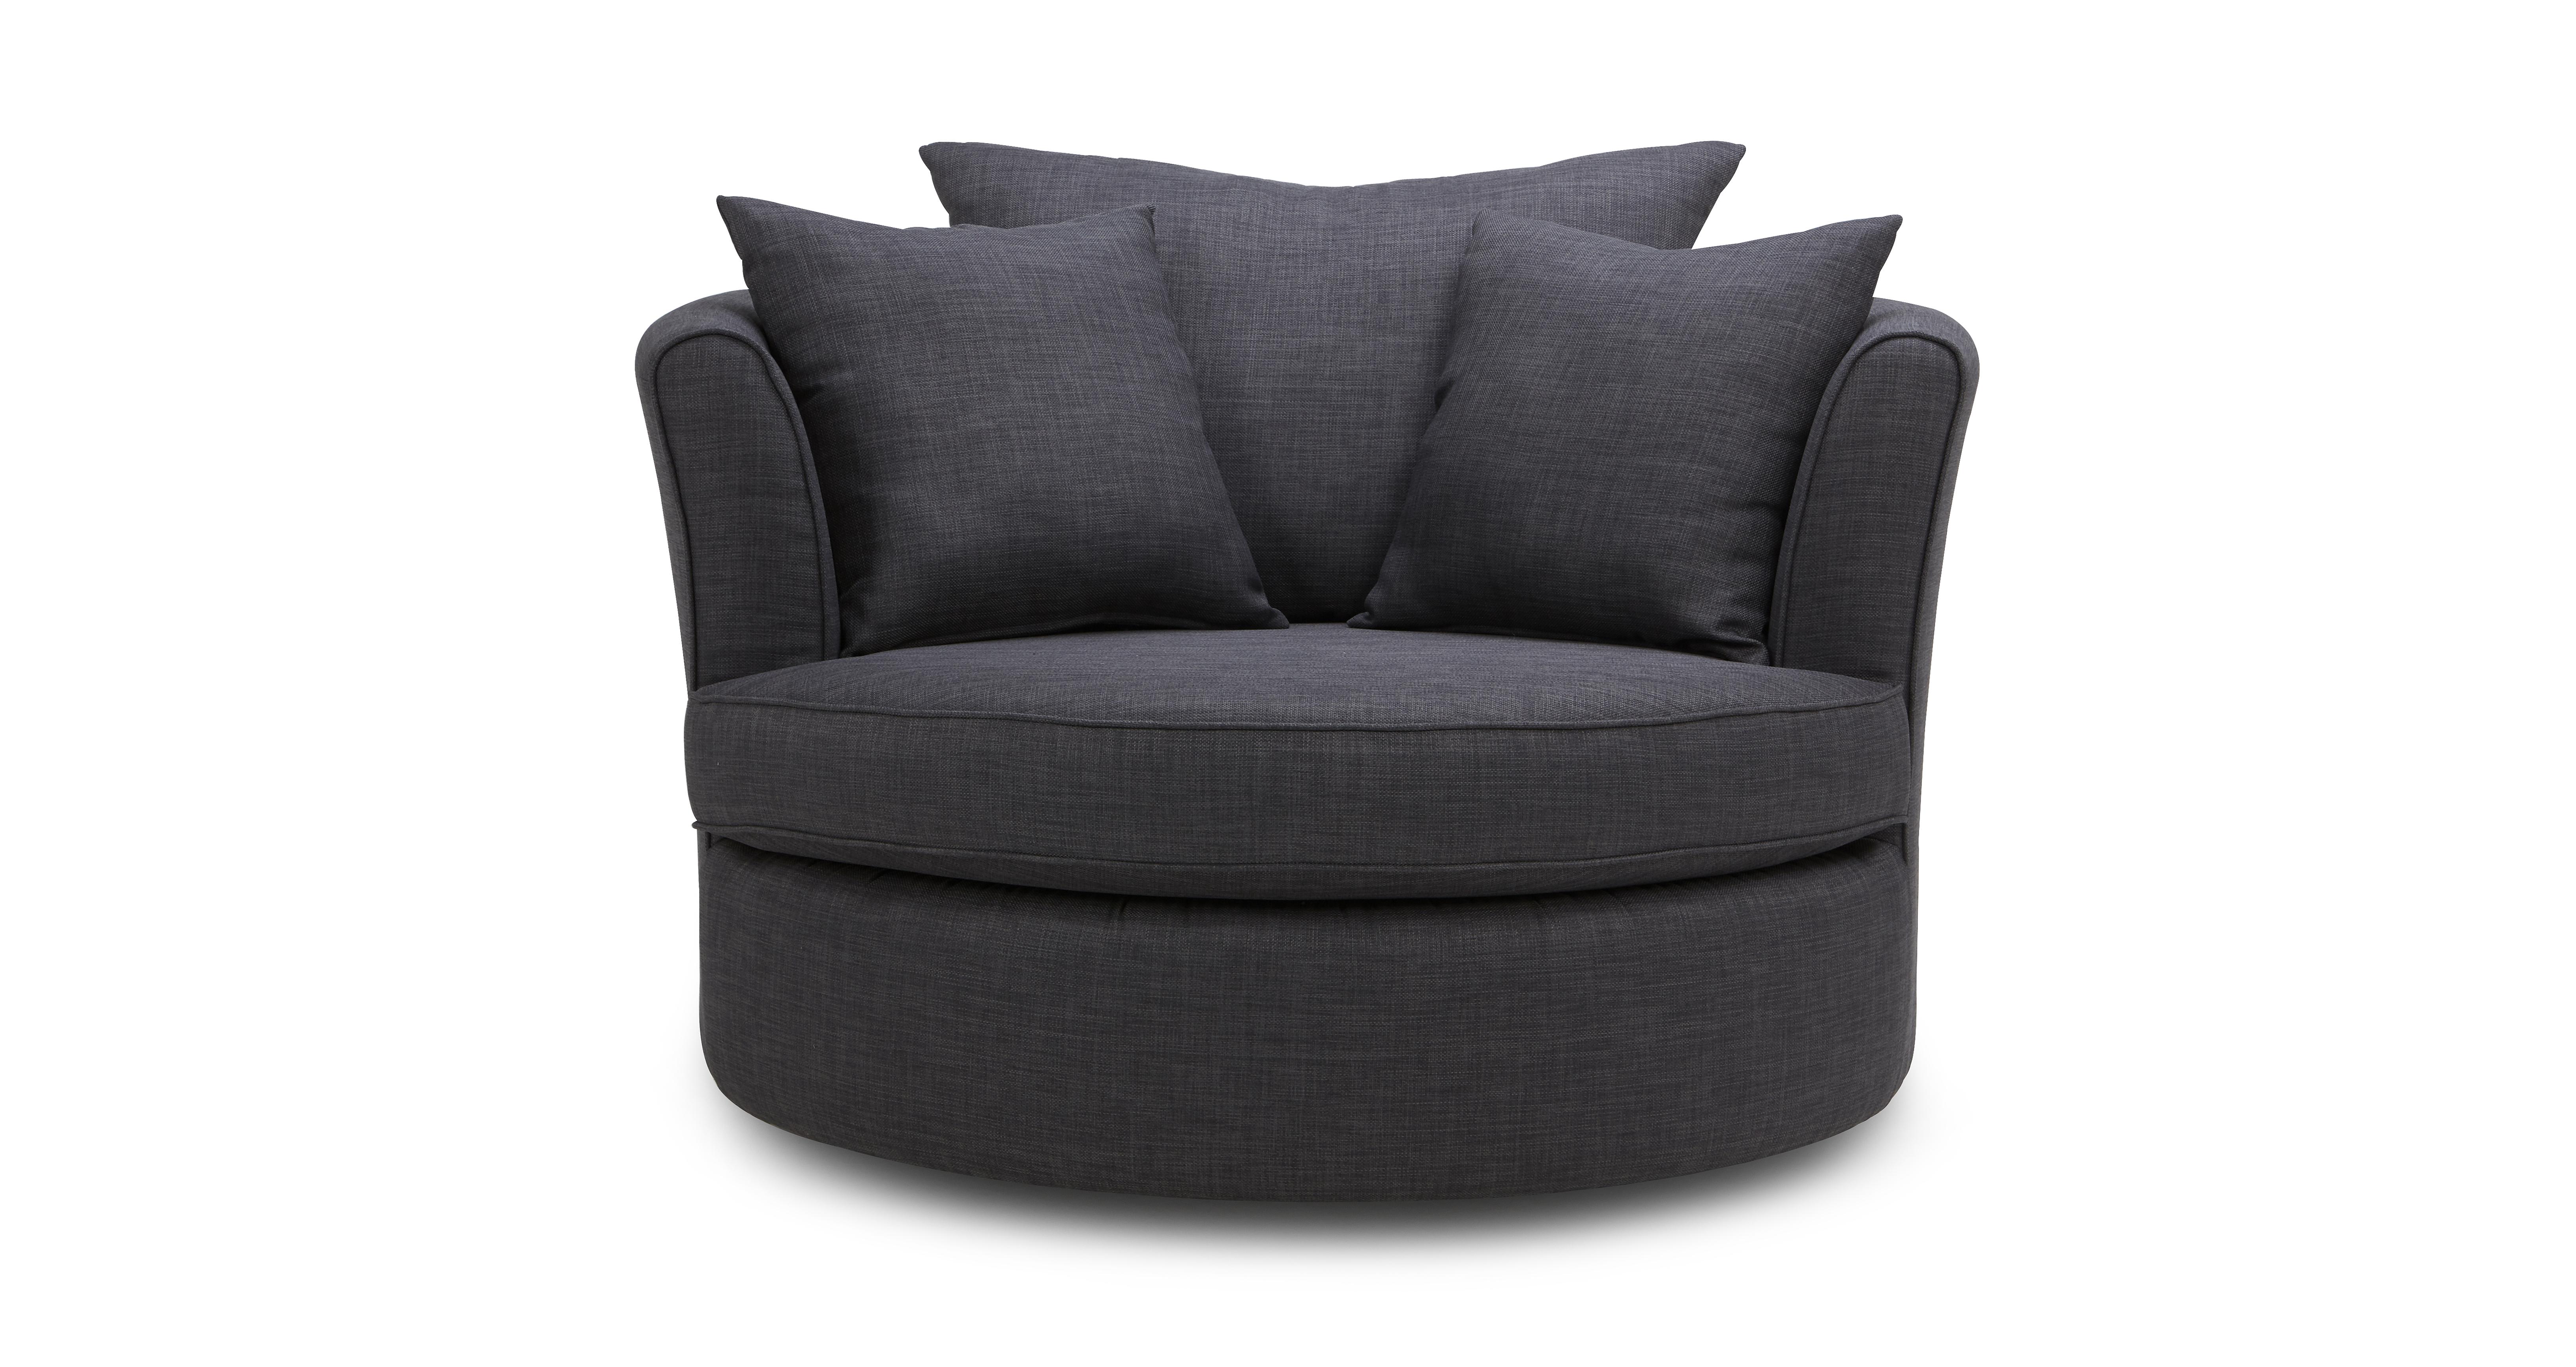 Ludo Large Swivel Chair With Plain Scatters | DFS